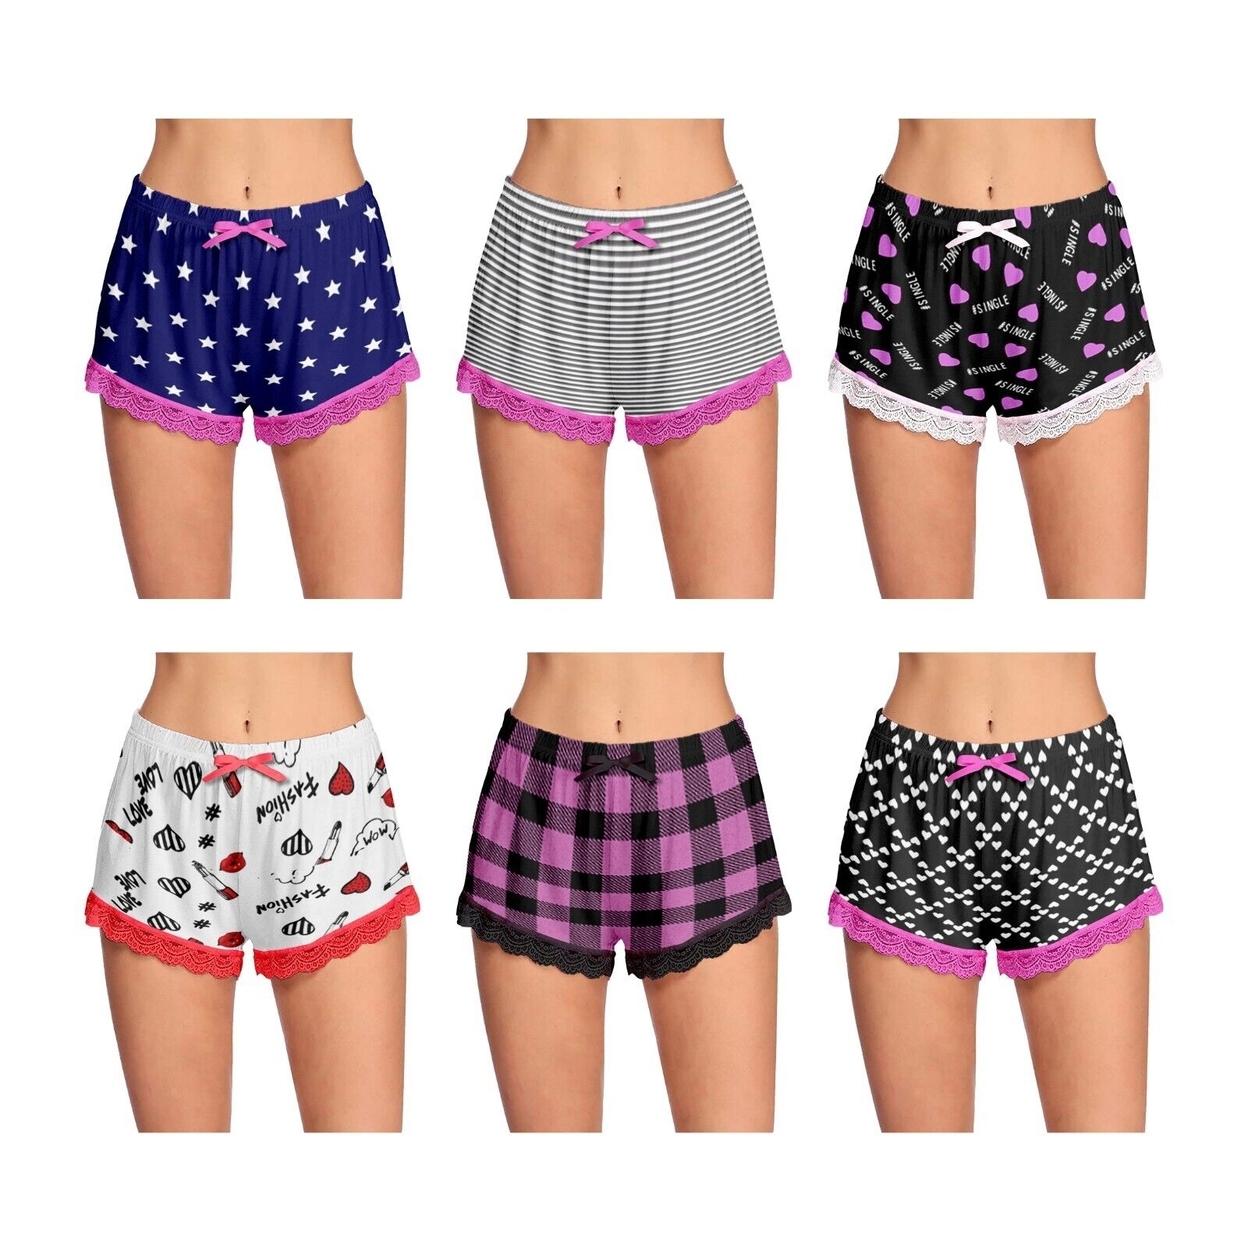 6-Pack: Women's Ultra-Soft Cozy Fun Printed Lace Trim Pajama Lounge Shorts - Small, Shapes